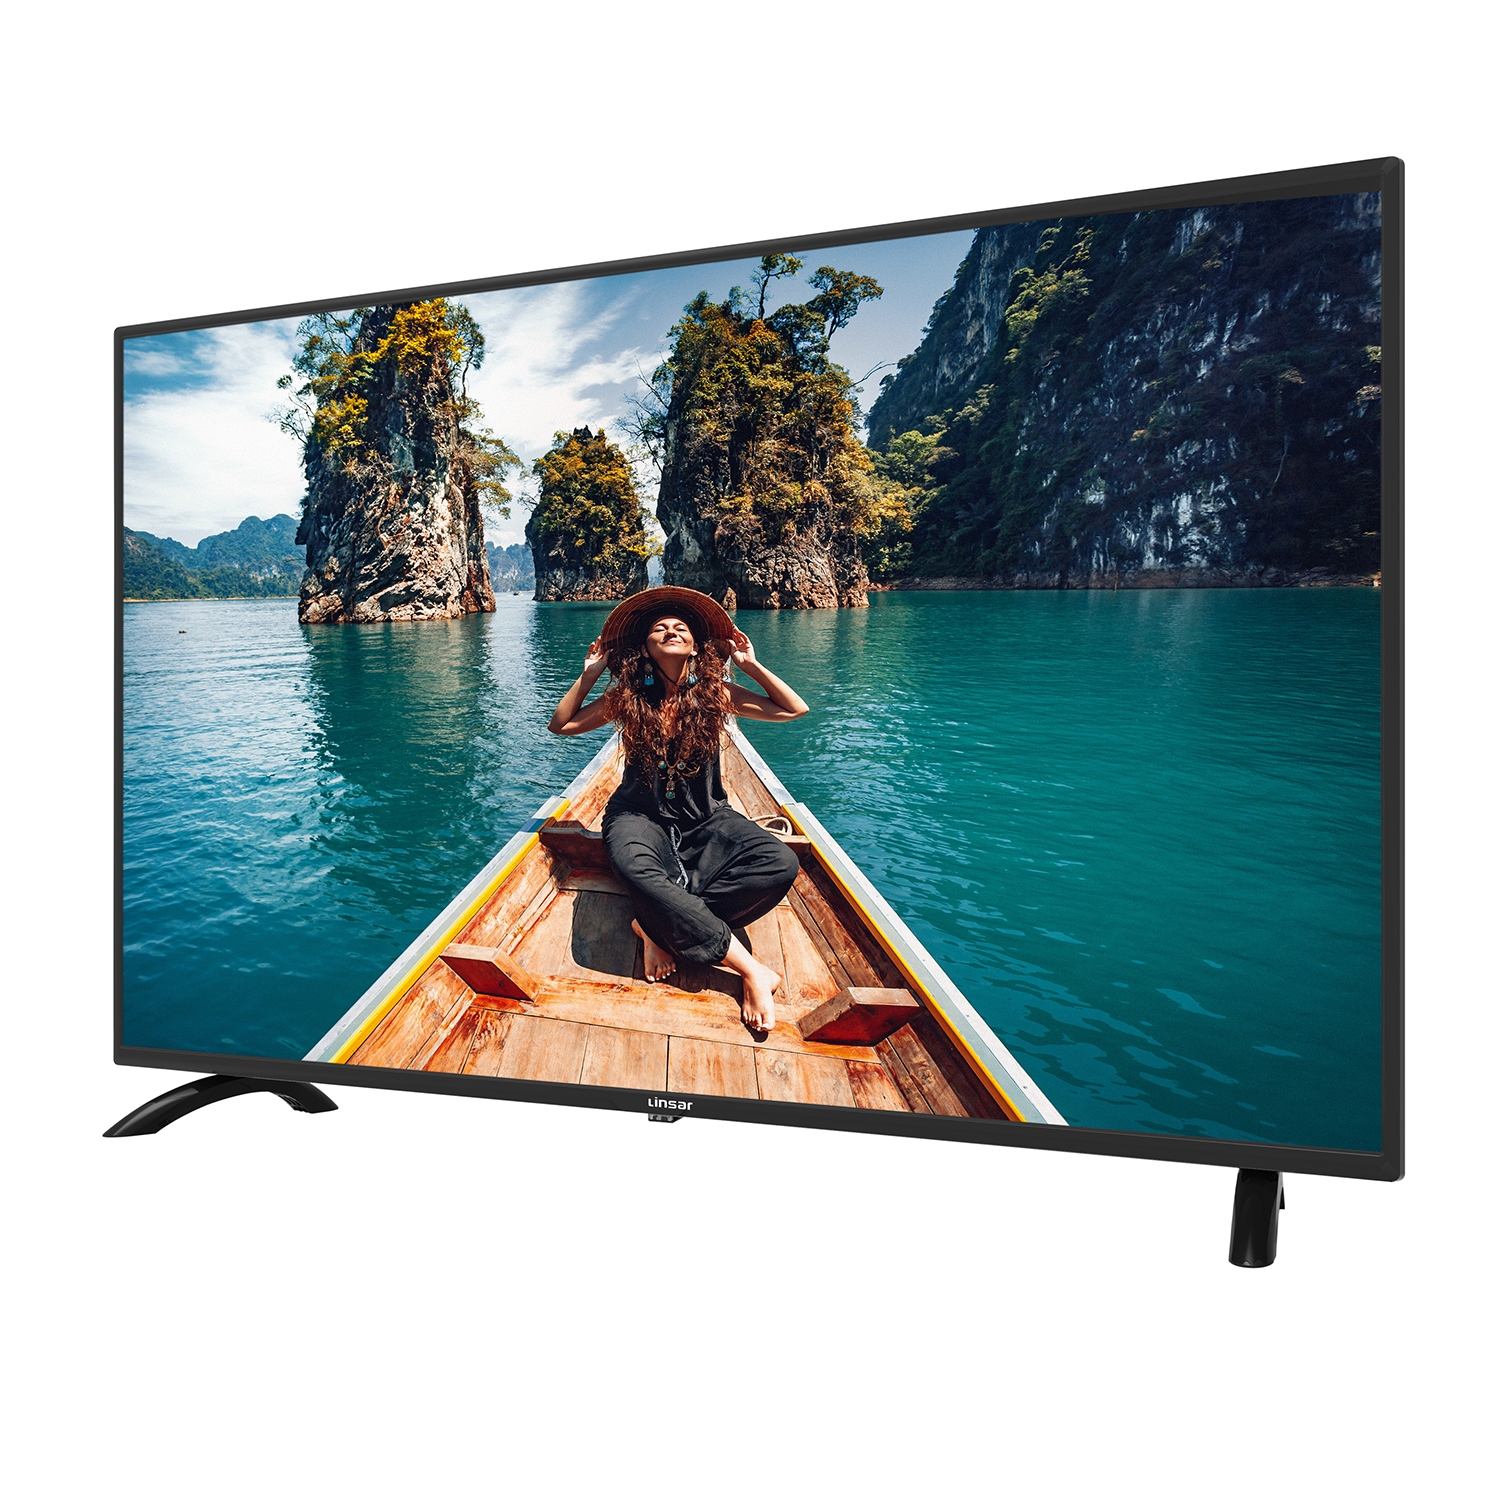 Linsar GT32LUXE 32" HD Ready TV - Freeview Play and USB Record/Playback - 1